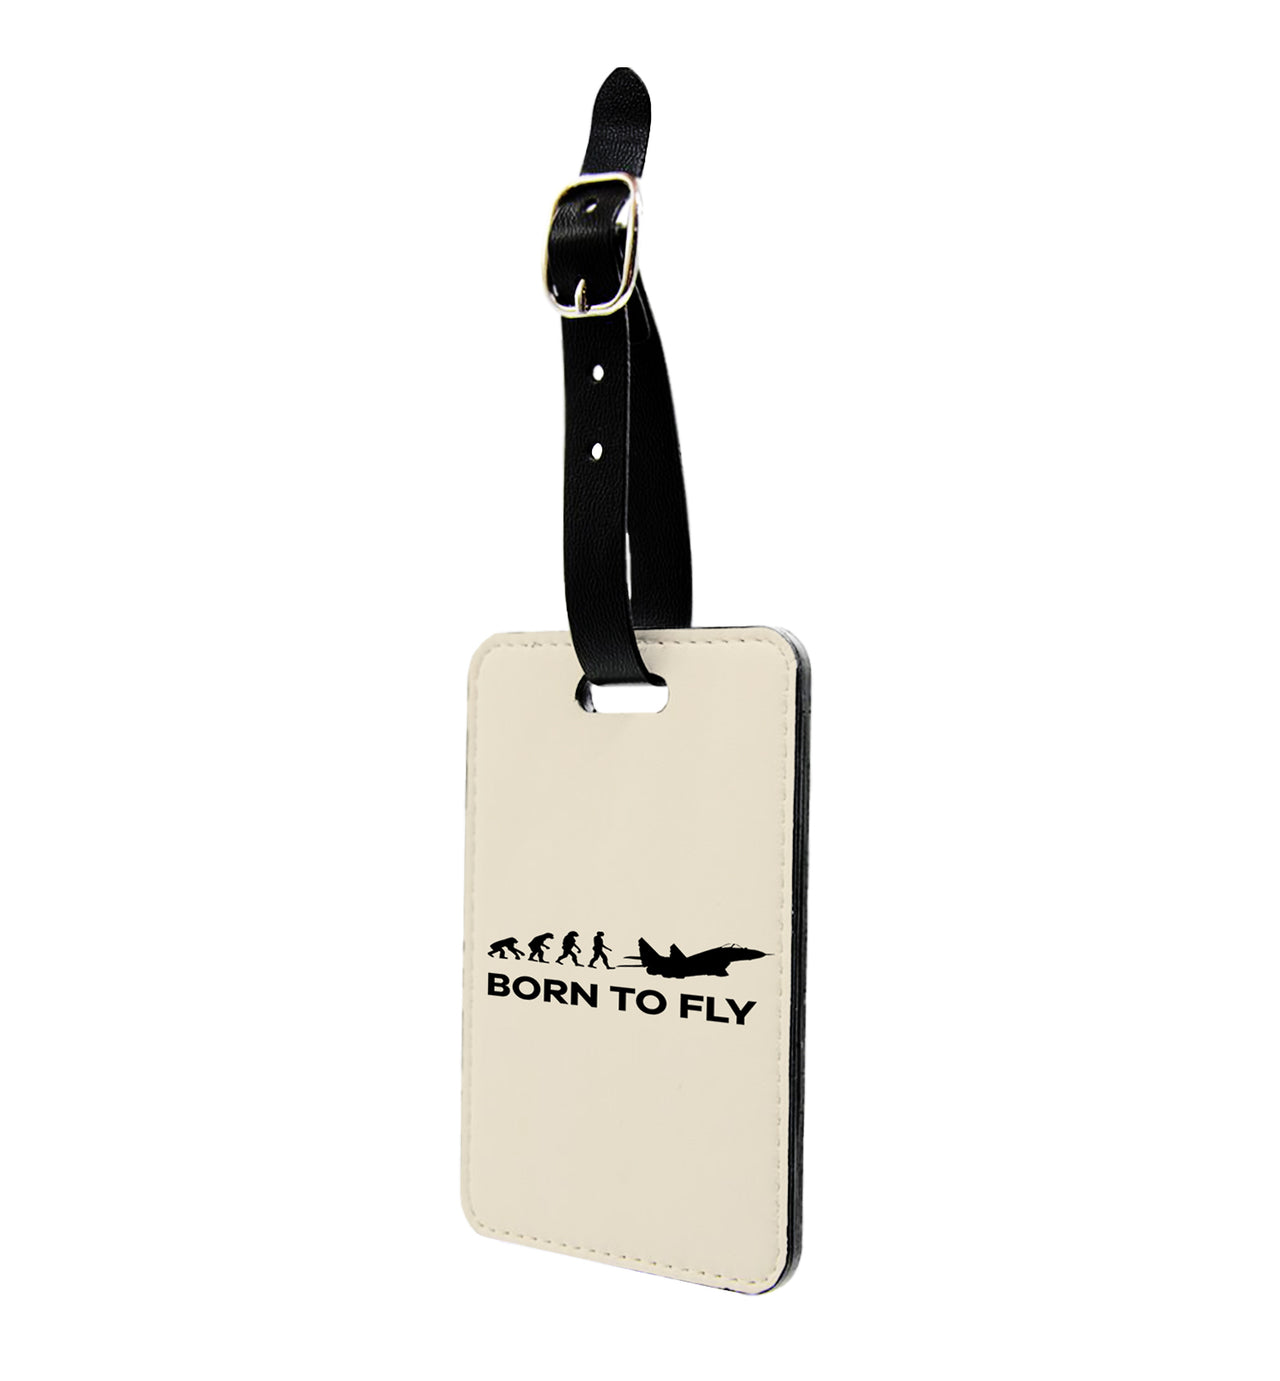 Born To Fly Military Designed Luggage Tag